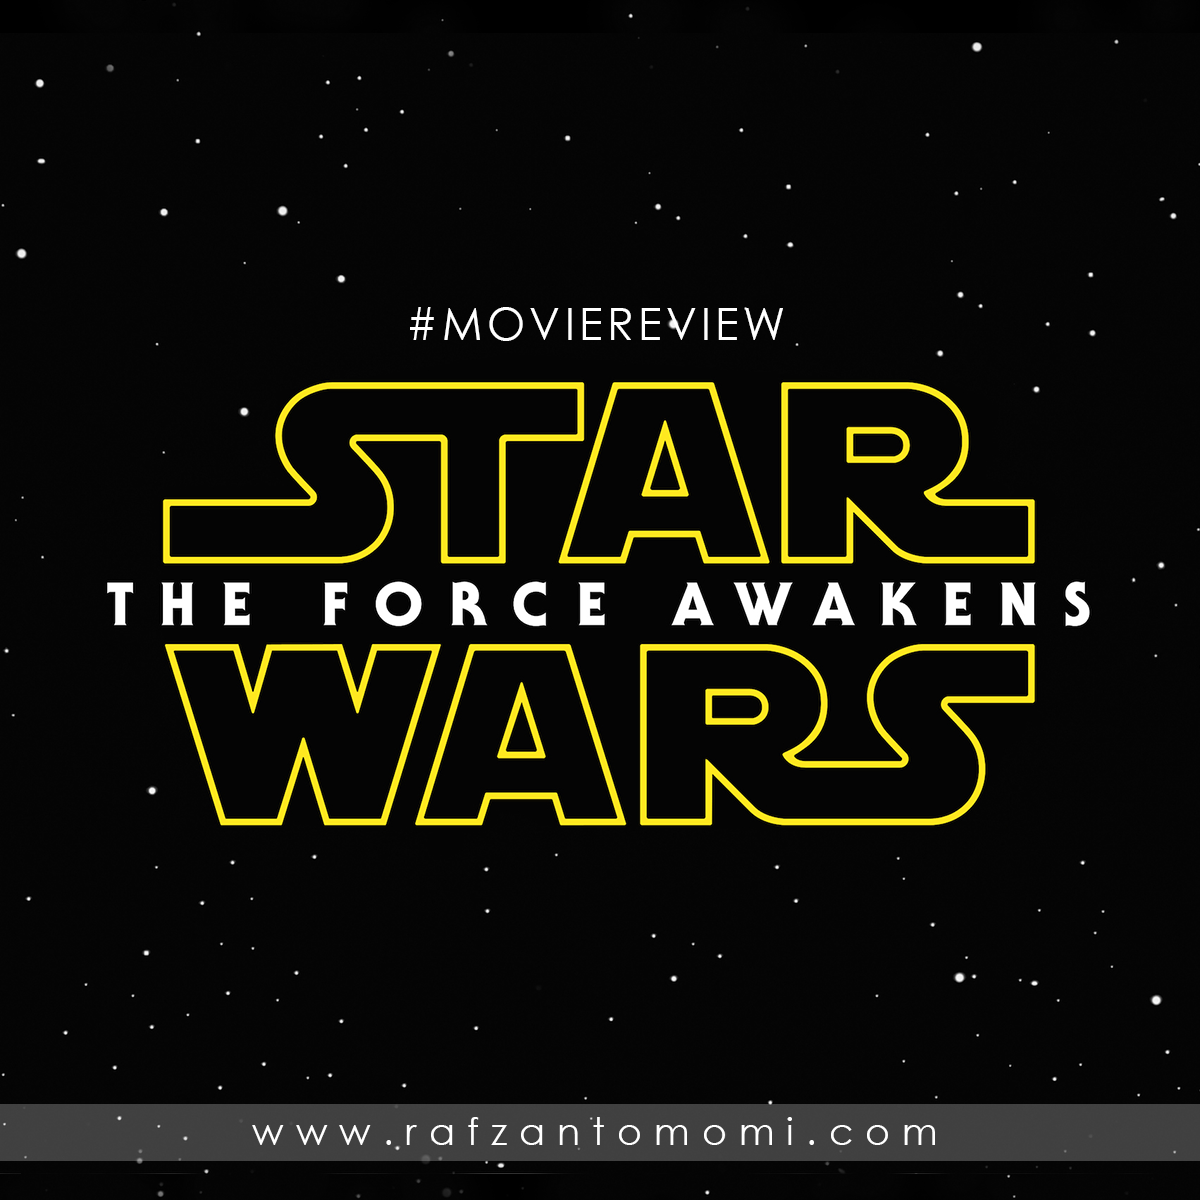 Movie Review - Star Wars : The Force Awakens